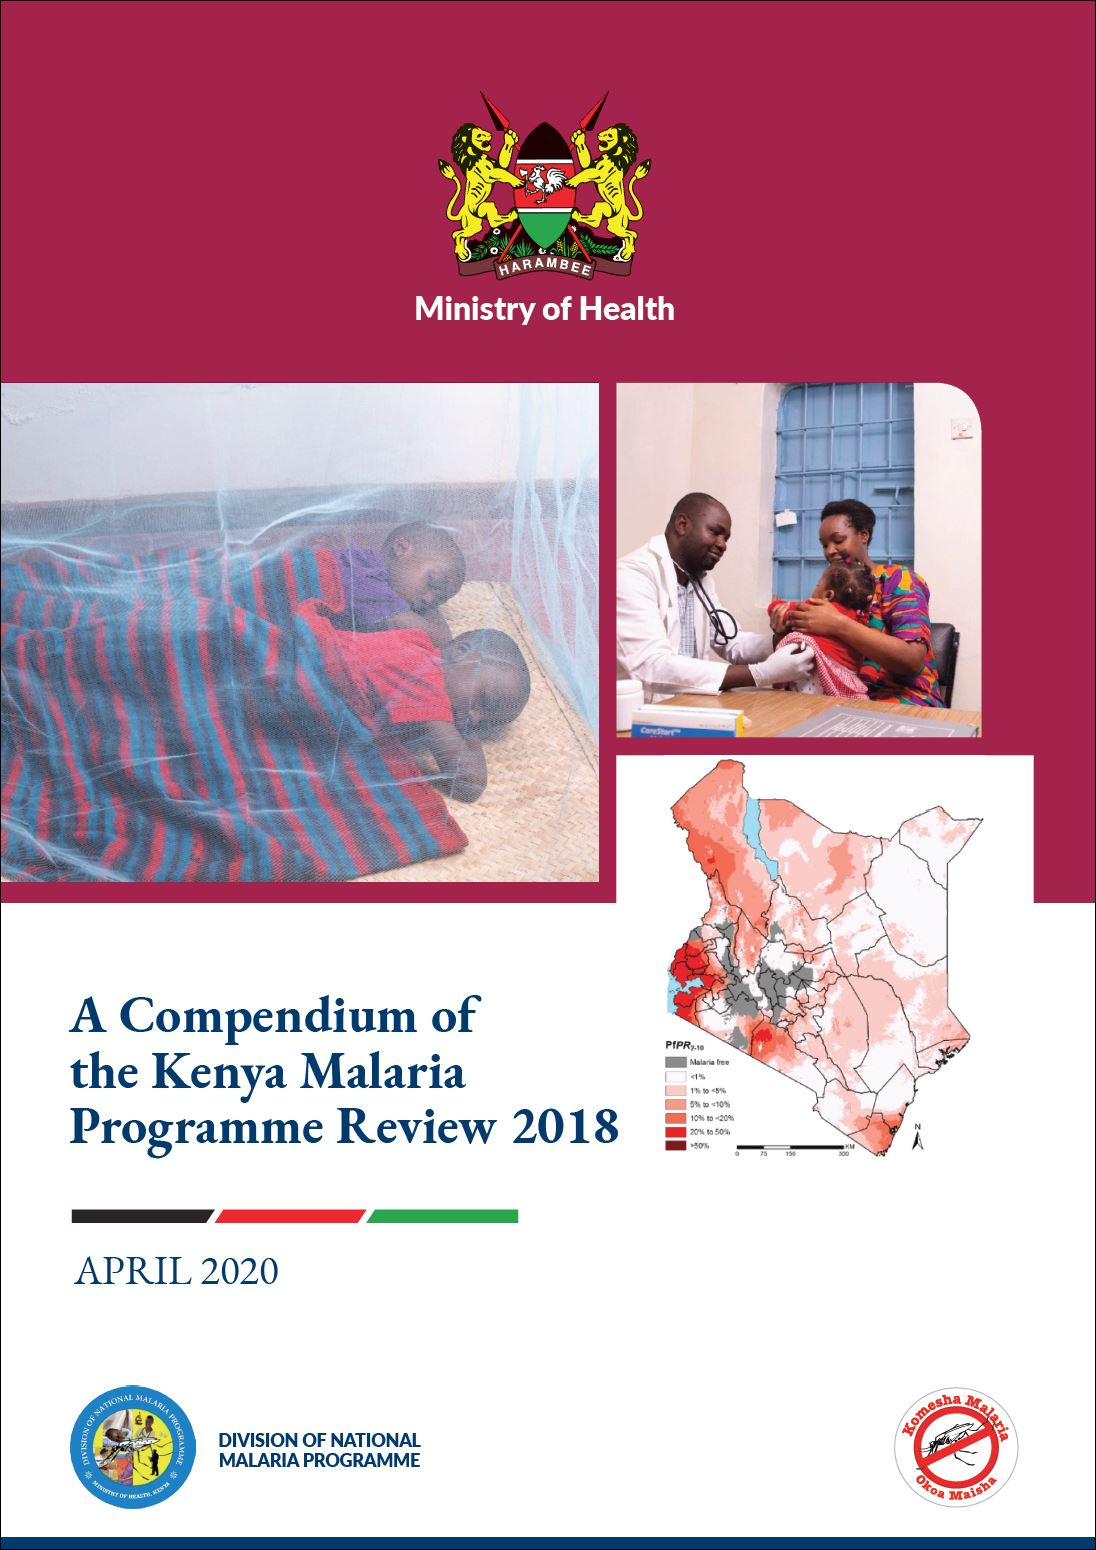 A Compendium of the Kenya Malaria Programme Review 2018